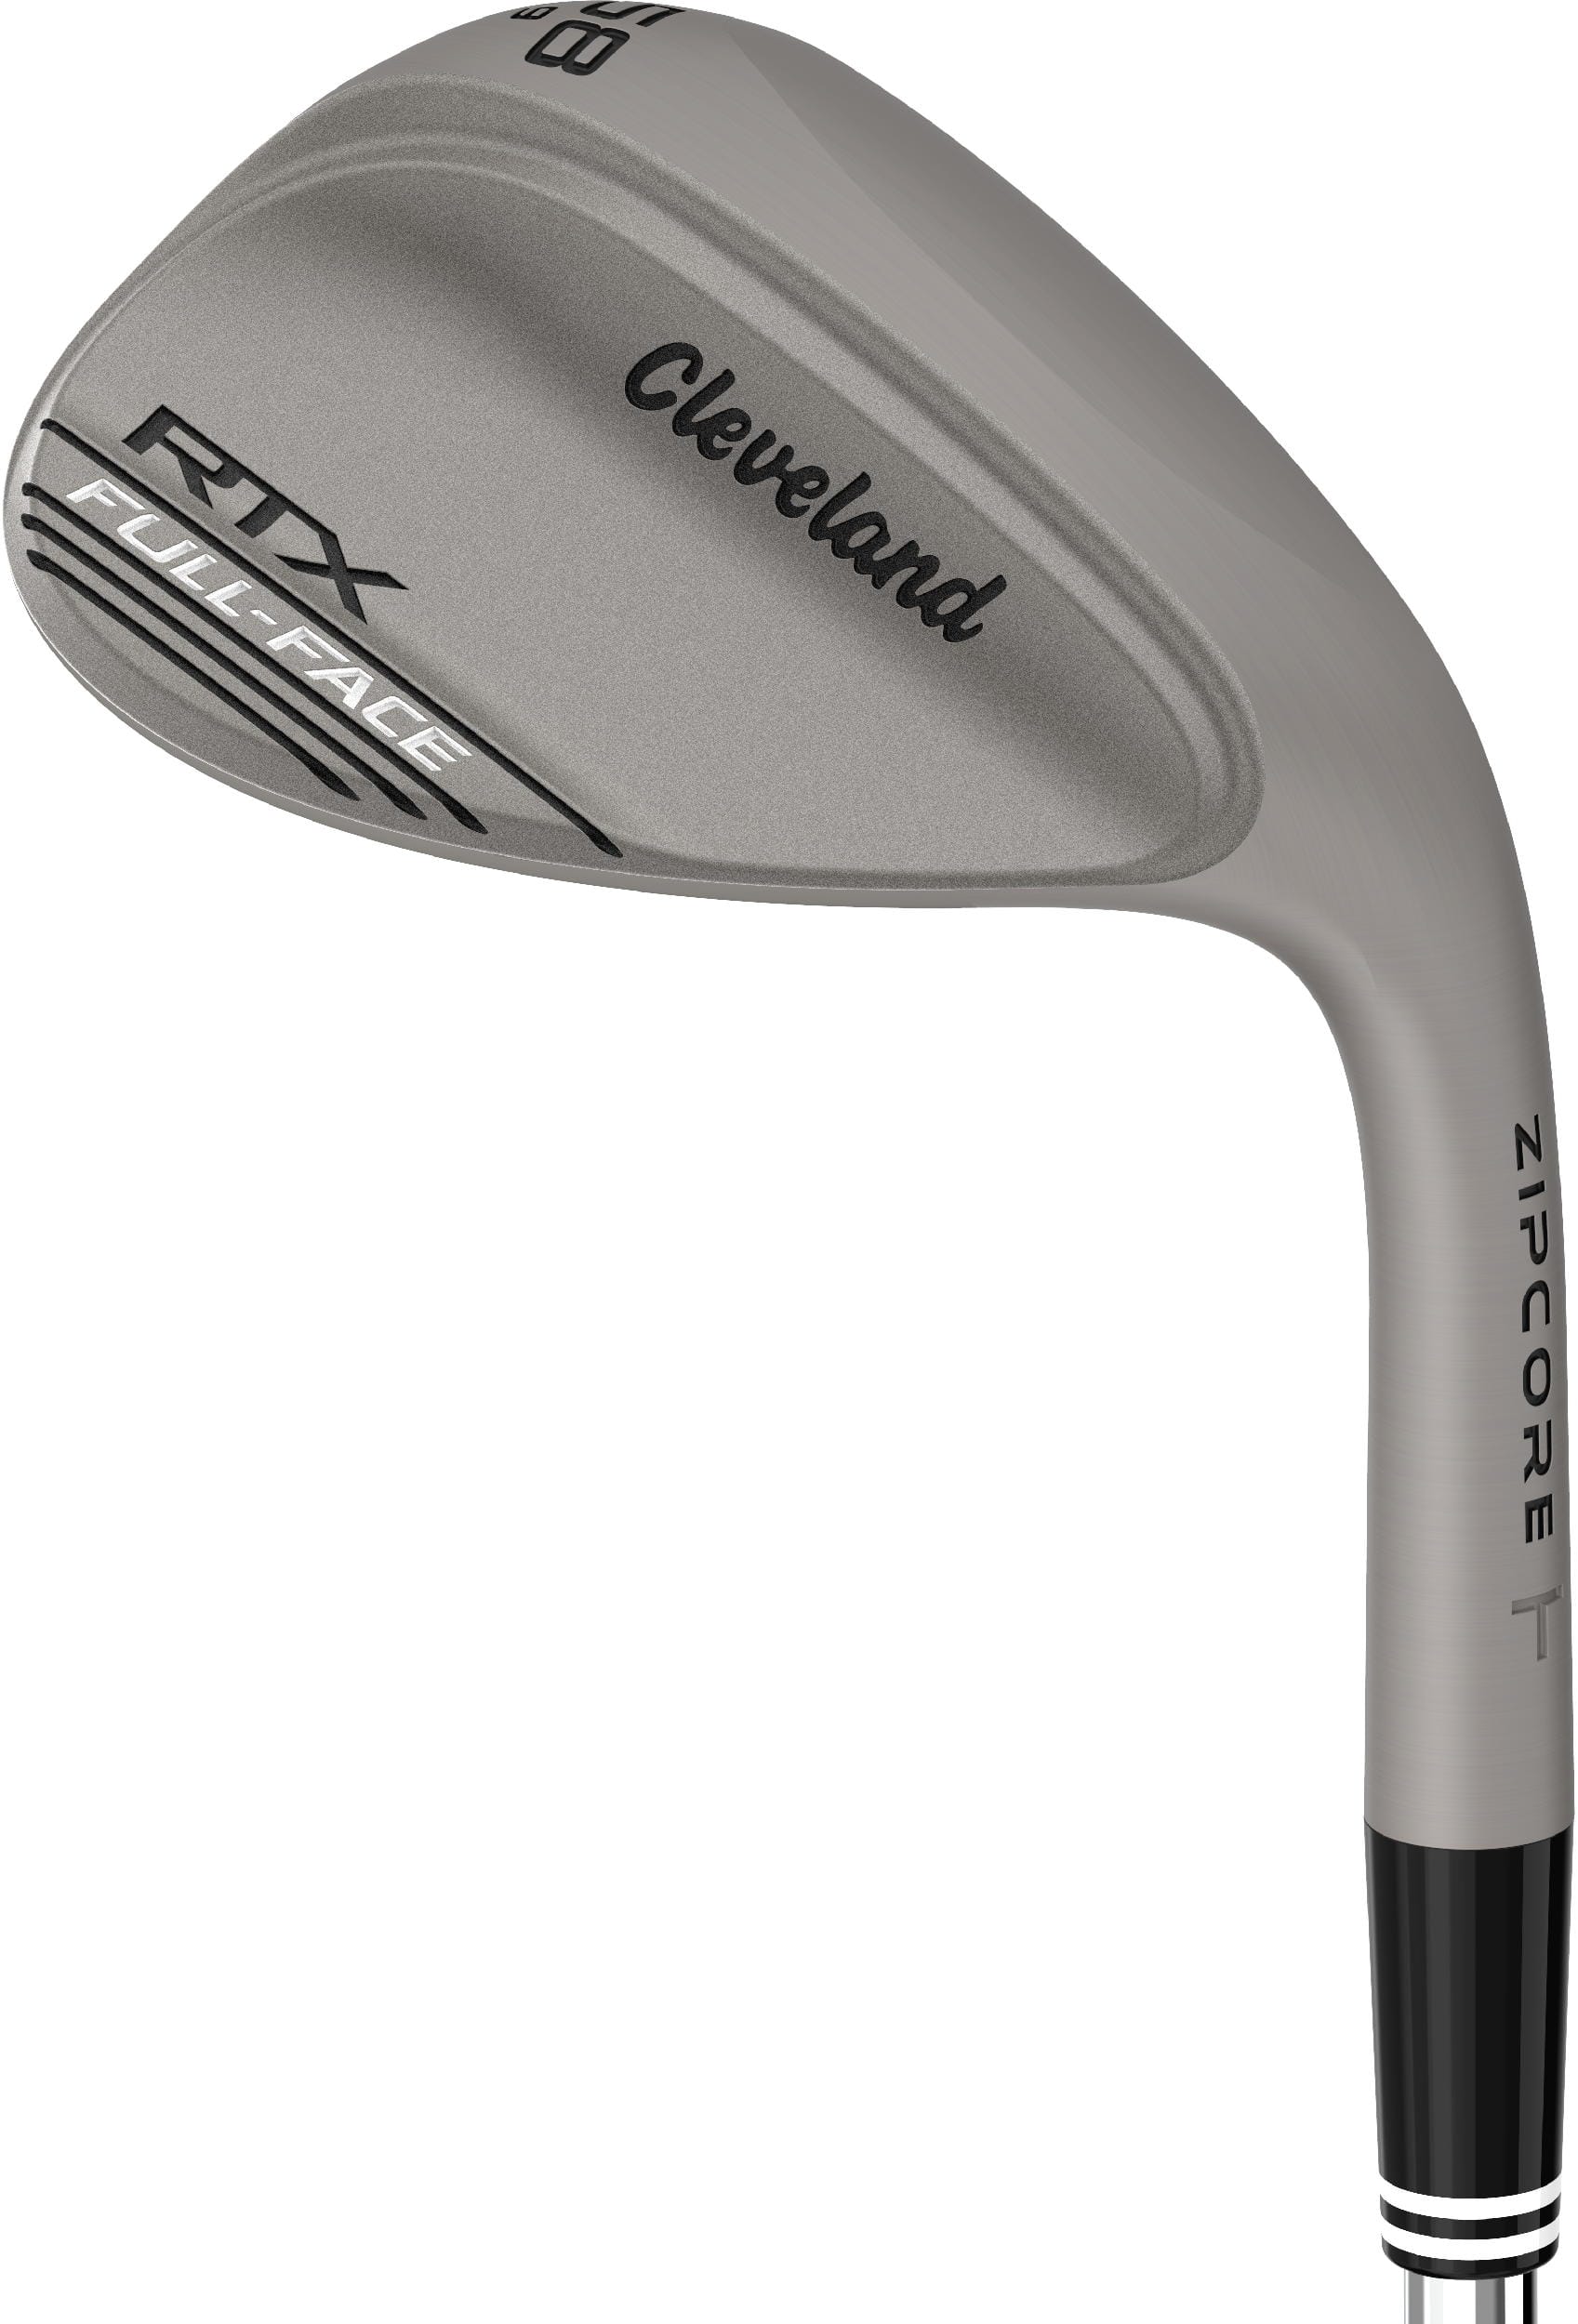 Cleveland RTX Full-Face Raw Wedge